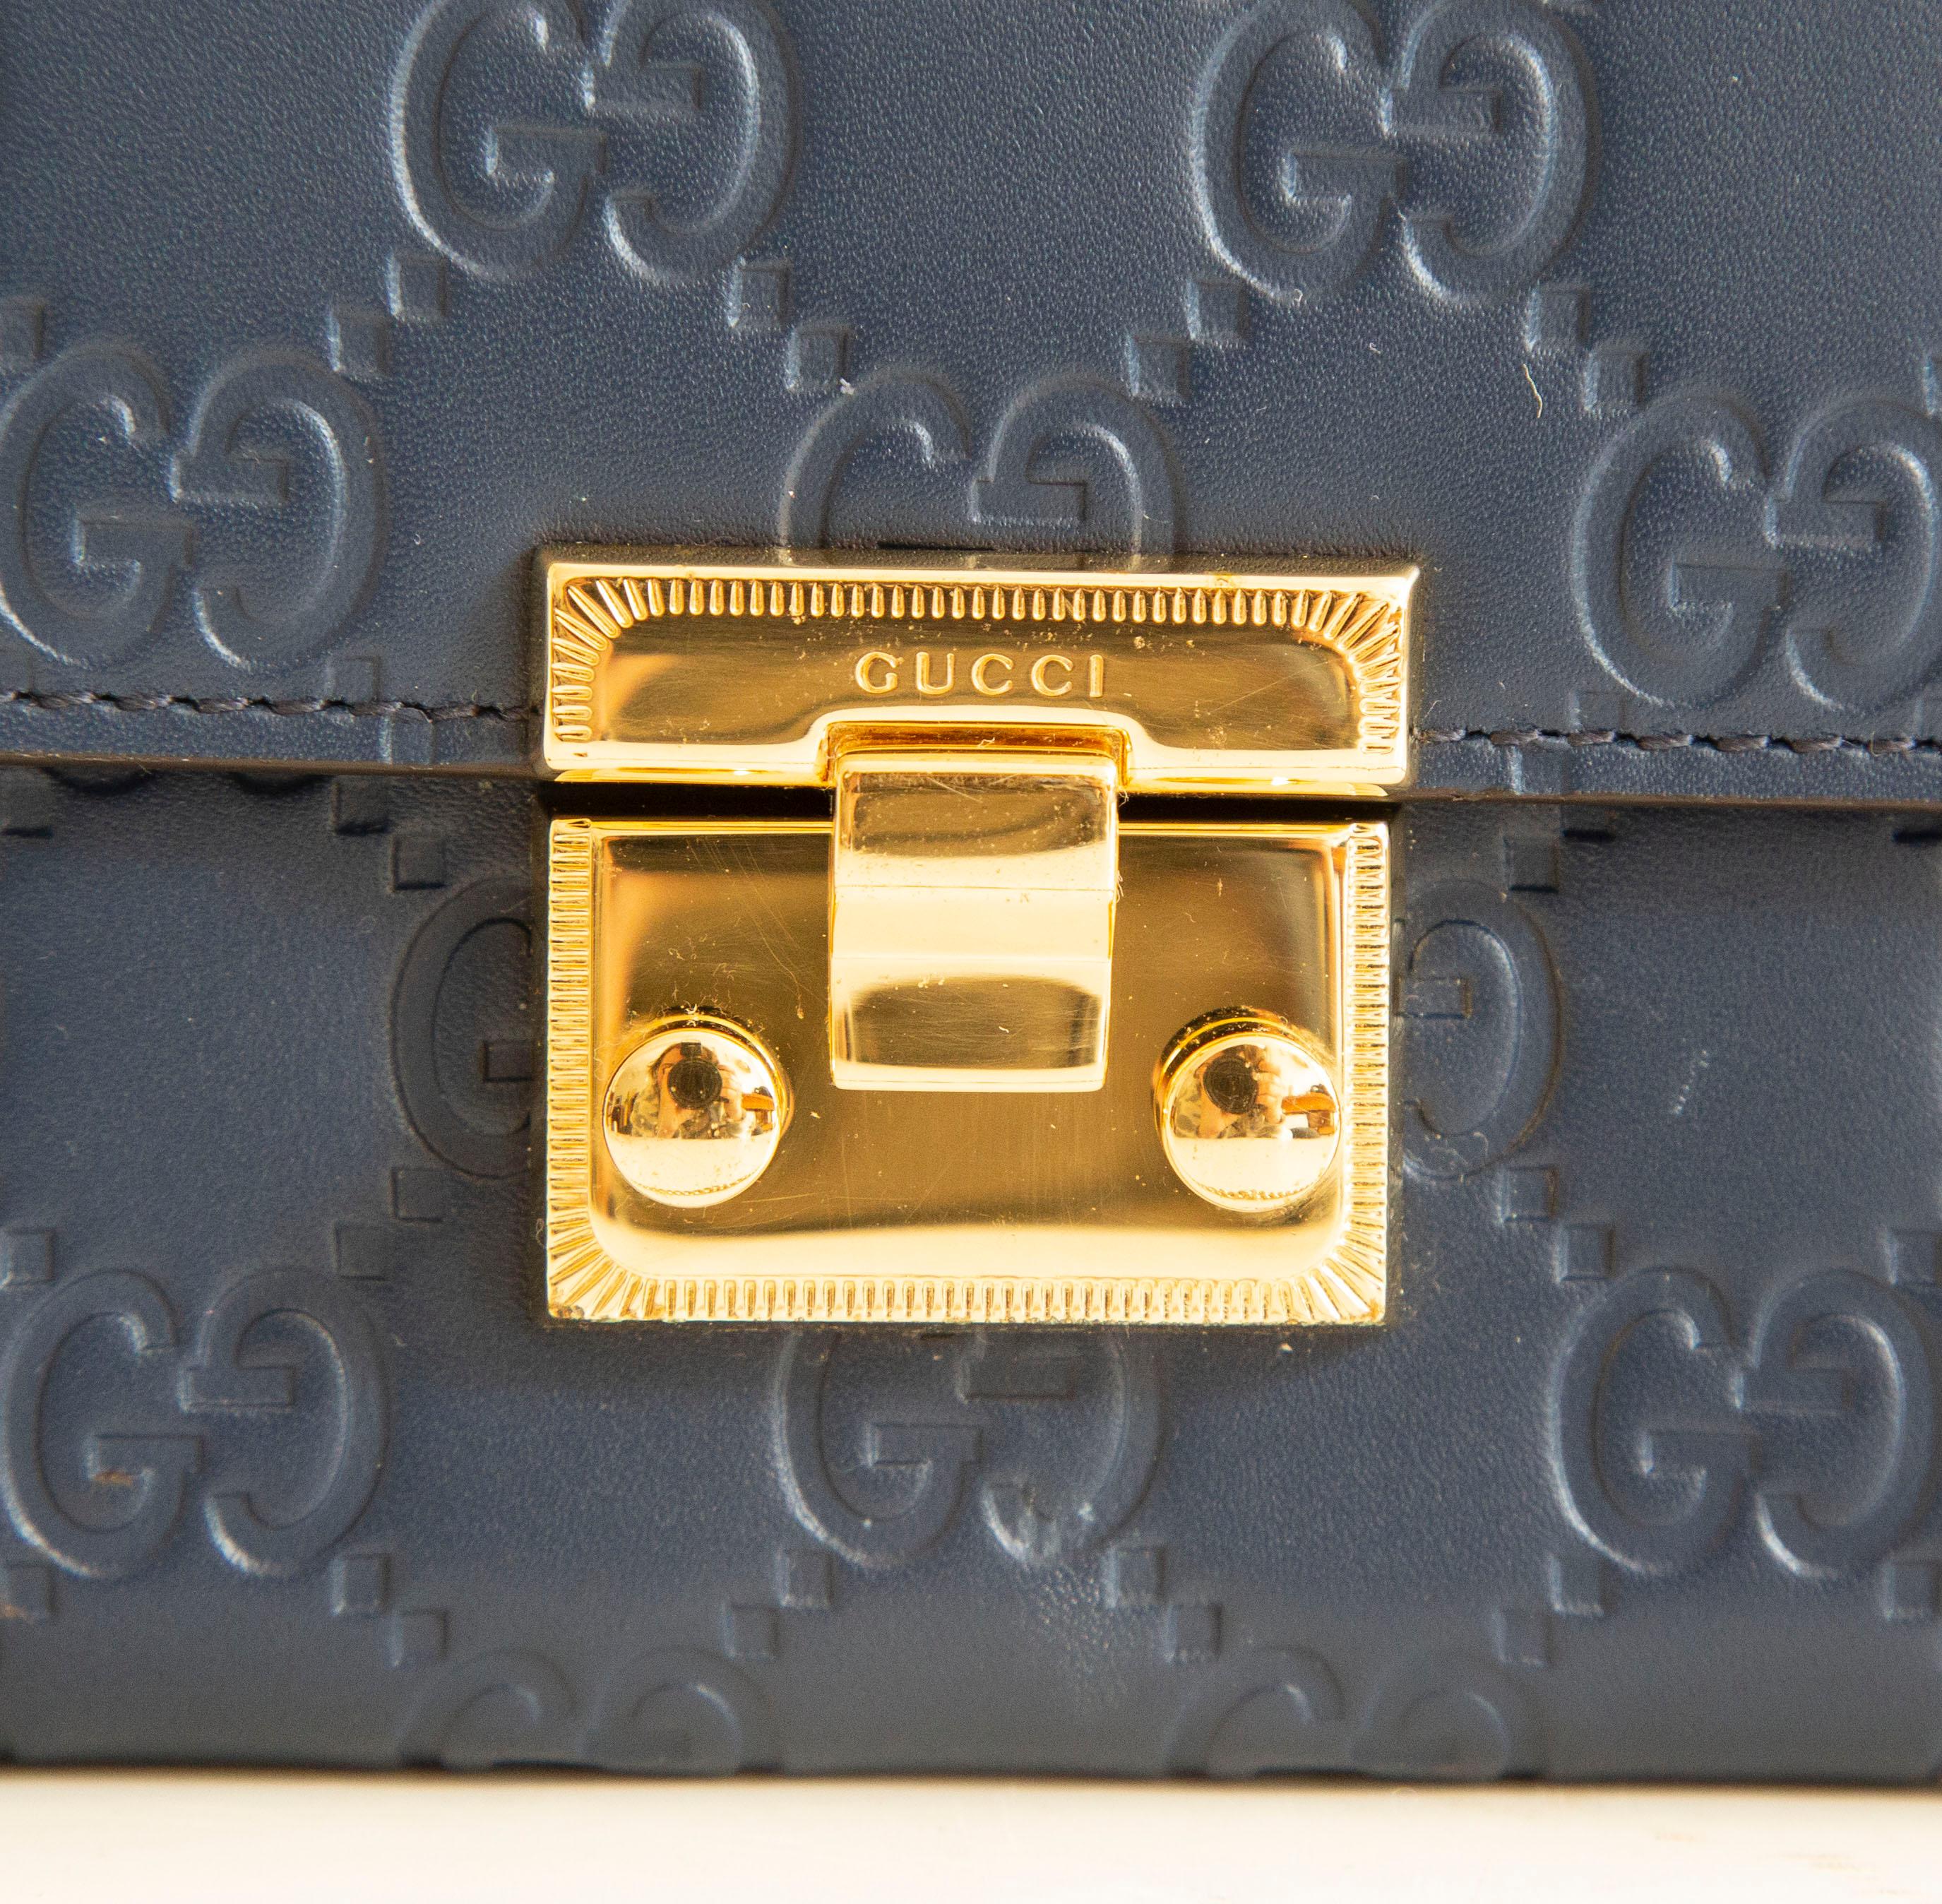 An authentic Gucci chain bi-fold wallet shoulder bag/clutch. The bag features a blue Guccissima embossed leather exterior and gold-toned hardware. The interior is lined with blue leather and is separated into two main compartments by a zipped pouch.